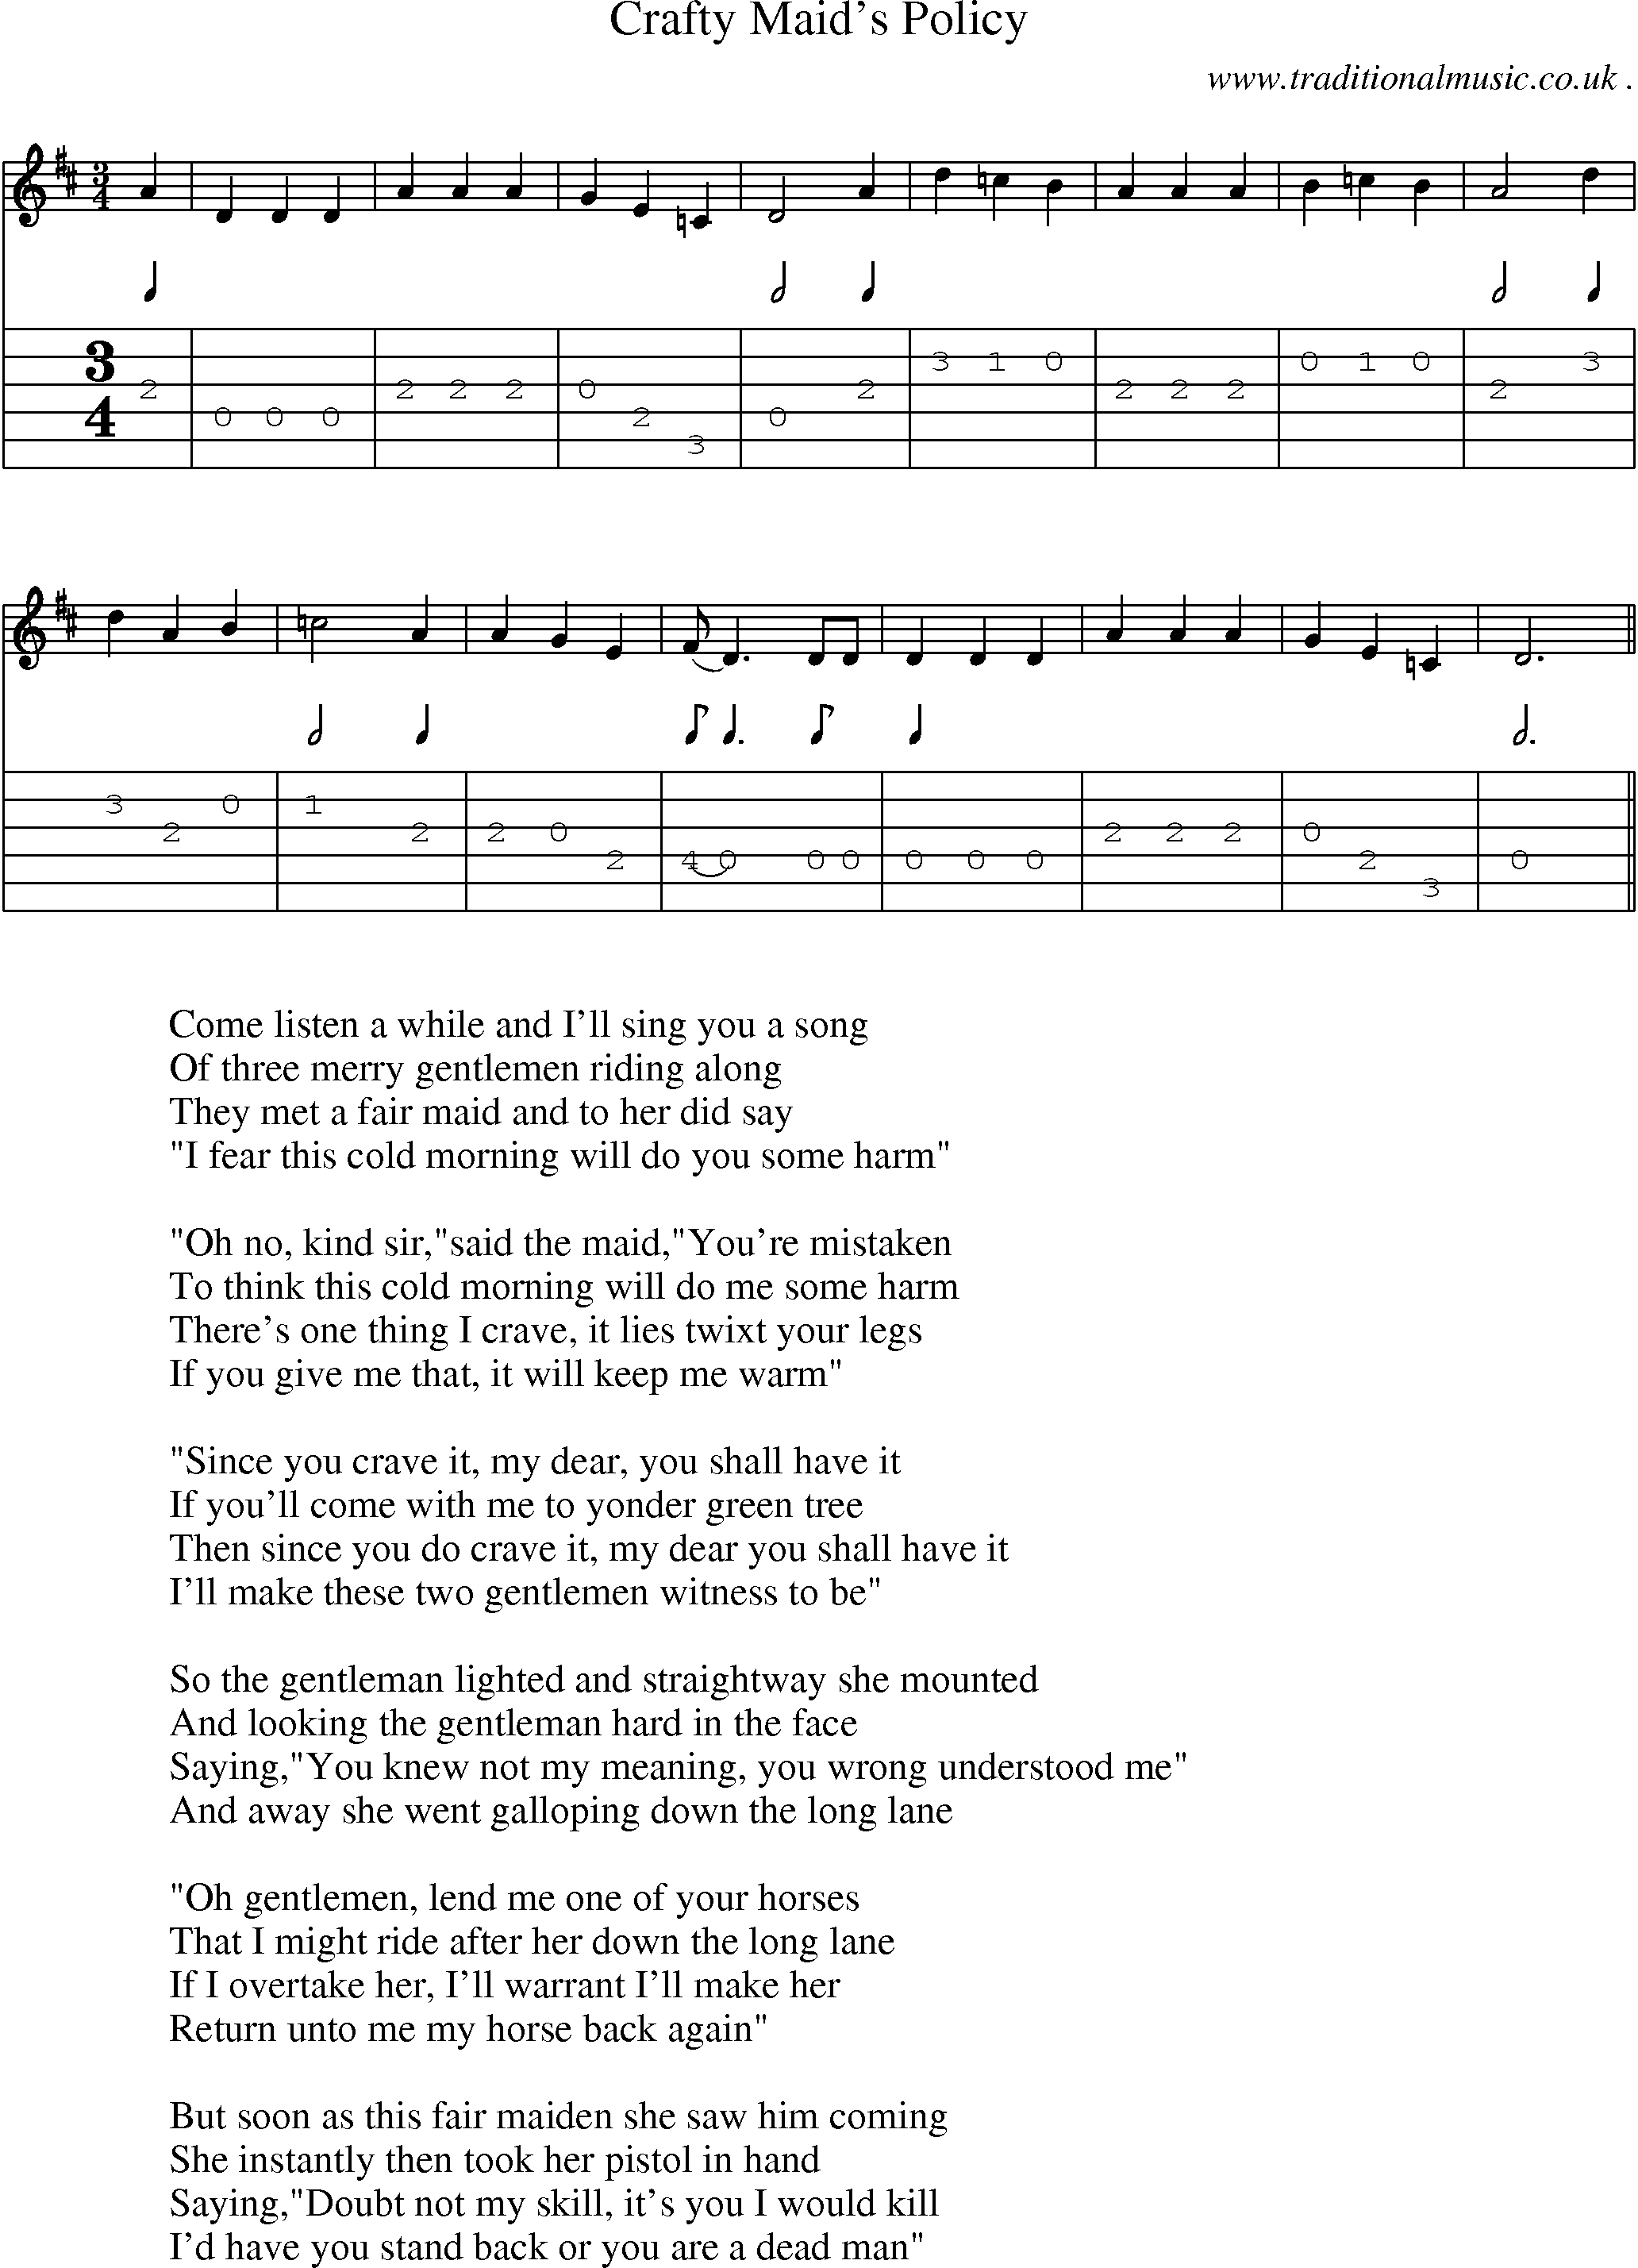 Sheet-Music and Guitar Tabs for Crafty Maids Policy